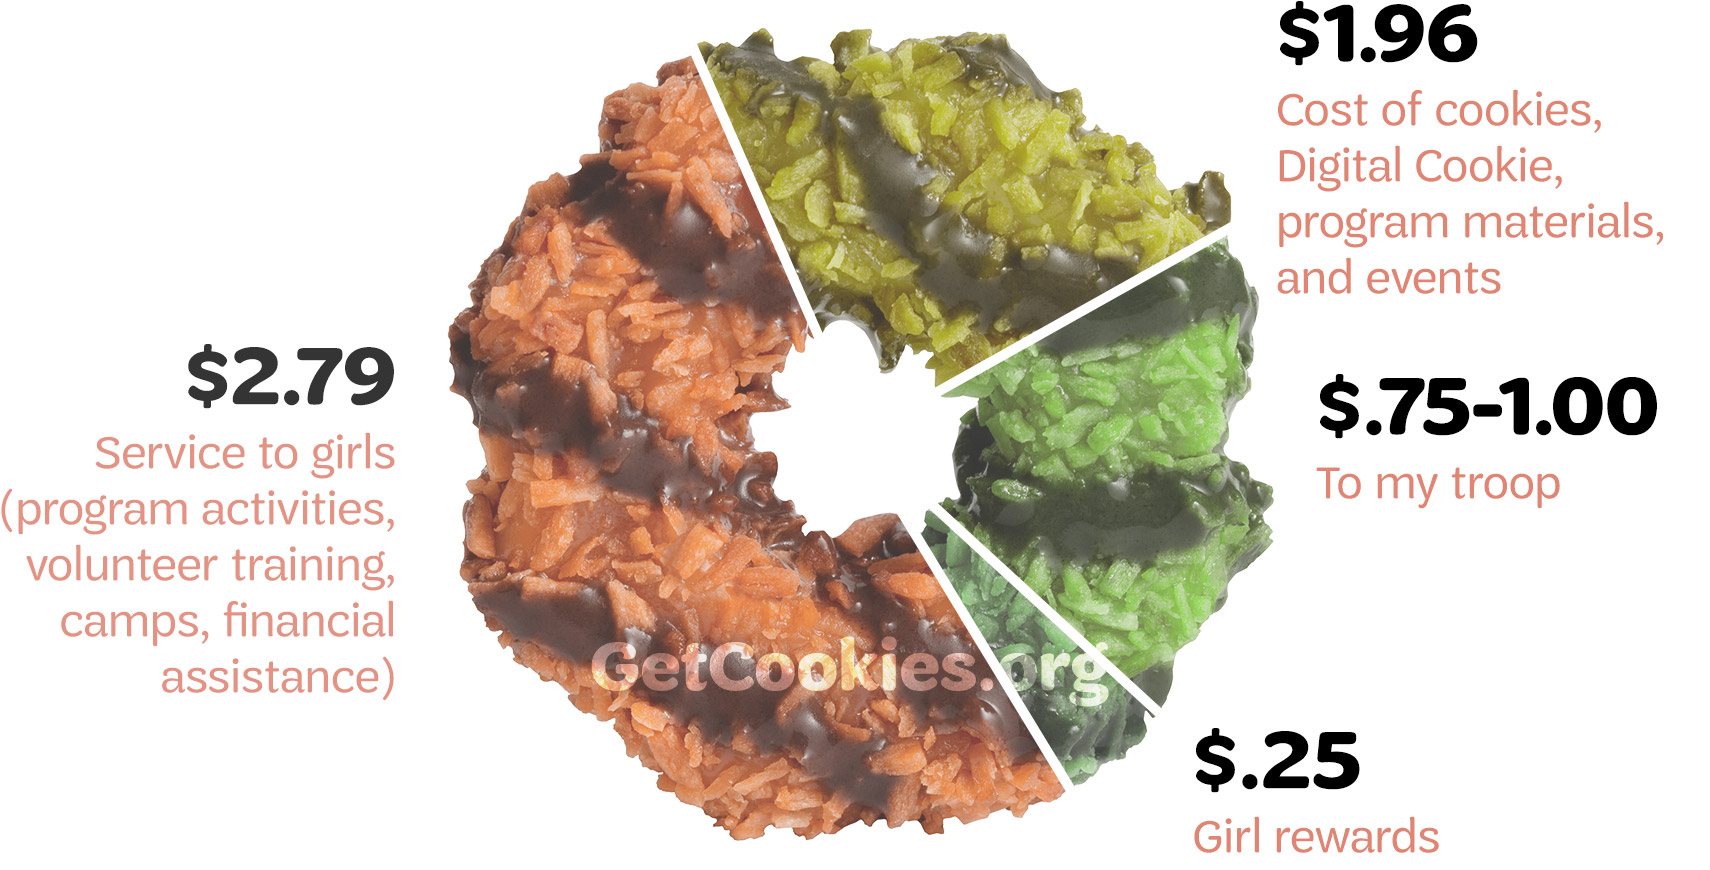 Pie chart in the shape of a Somoa cookie, showing the proceeds breakdown for each $6 box of cookies. $2.79 goes to Service to girls. $1.96 goes to cost of cookies, Digital Cookie, program materials, and events. $.75 to $1.00 goes to my troop. $.25 goes to Girl rewards.